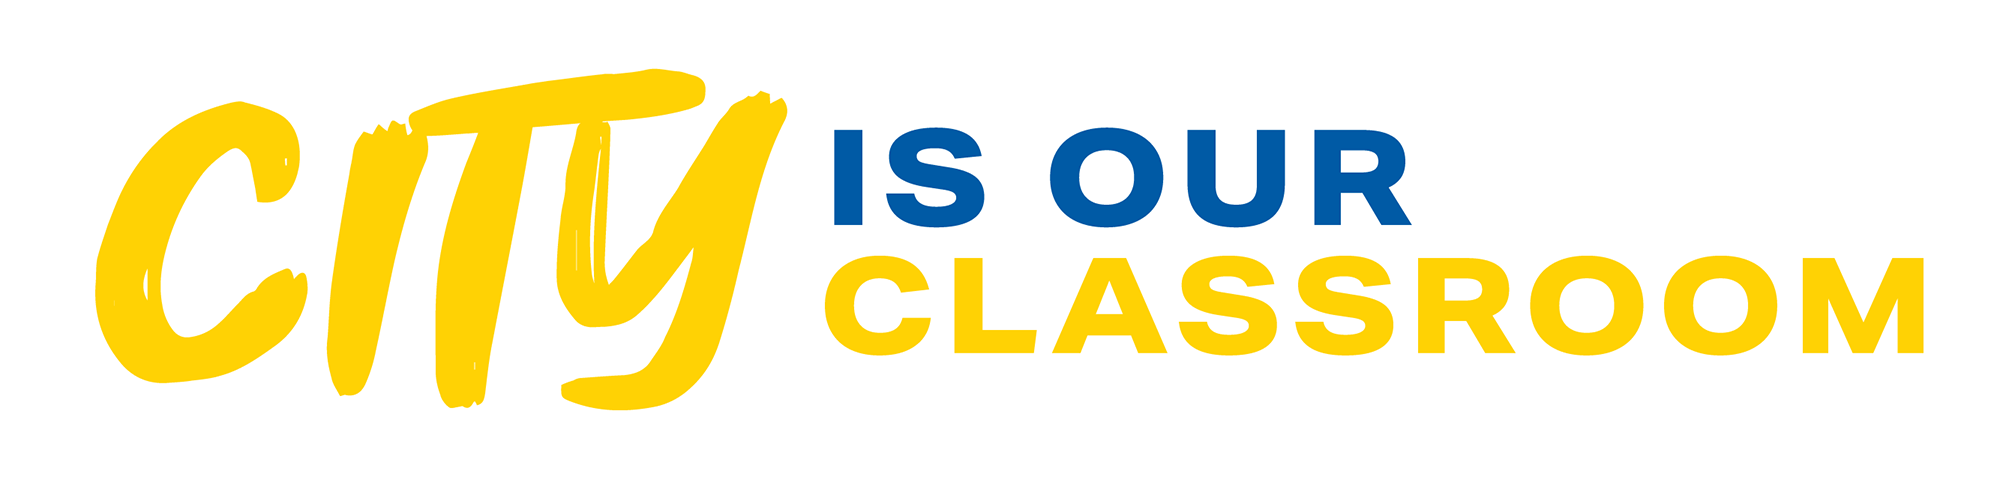 City is our classroom logo 